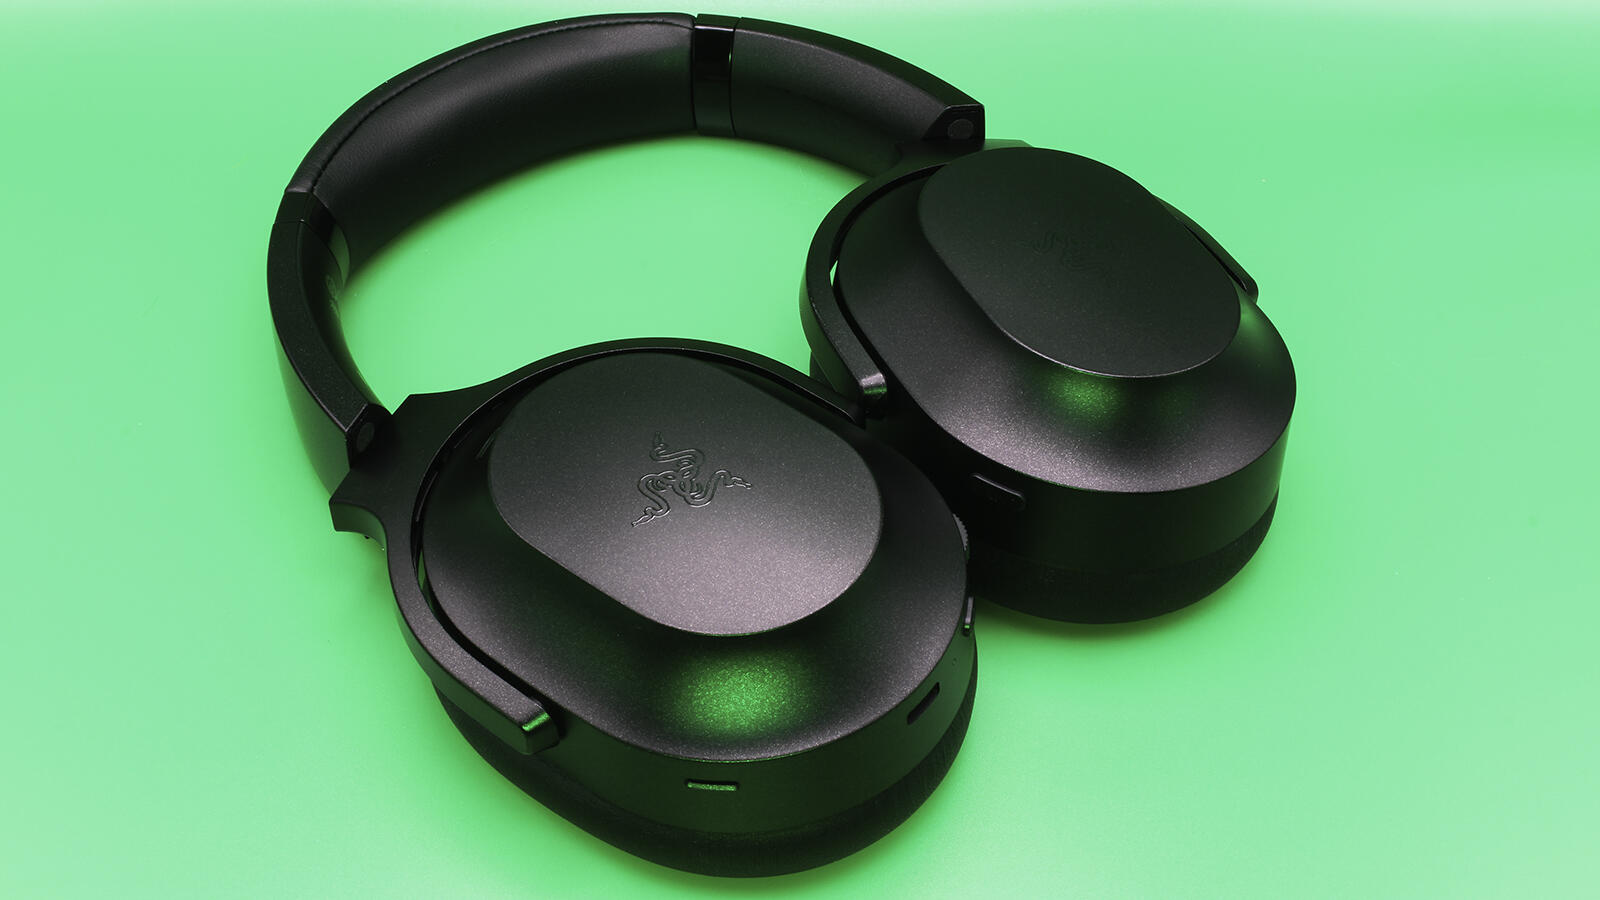 Razer Barracuda Pro review: A less embarrassing gaming headset